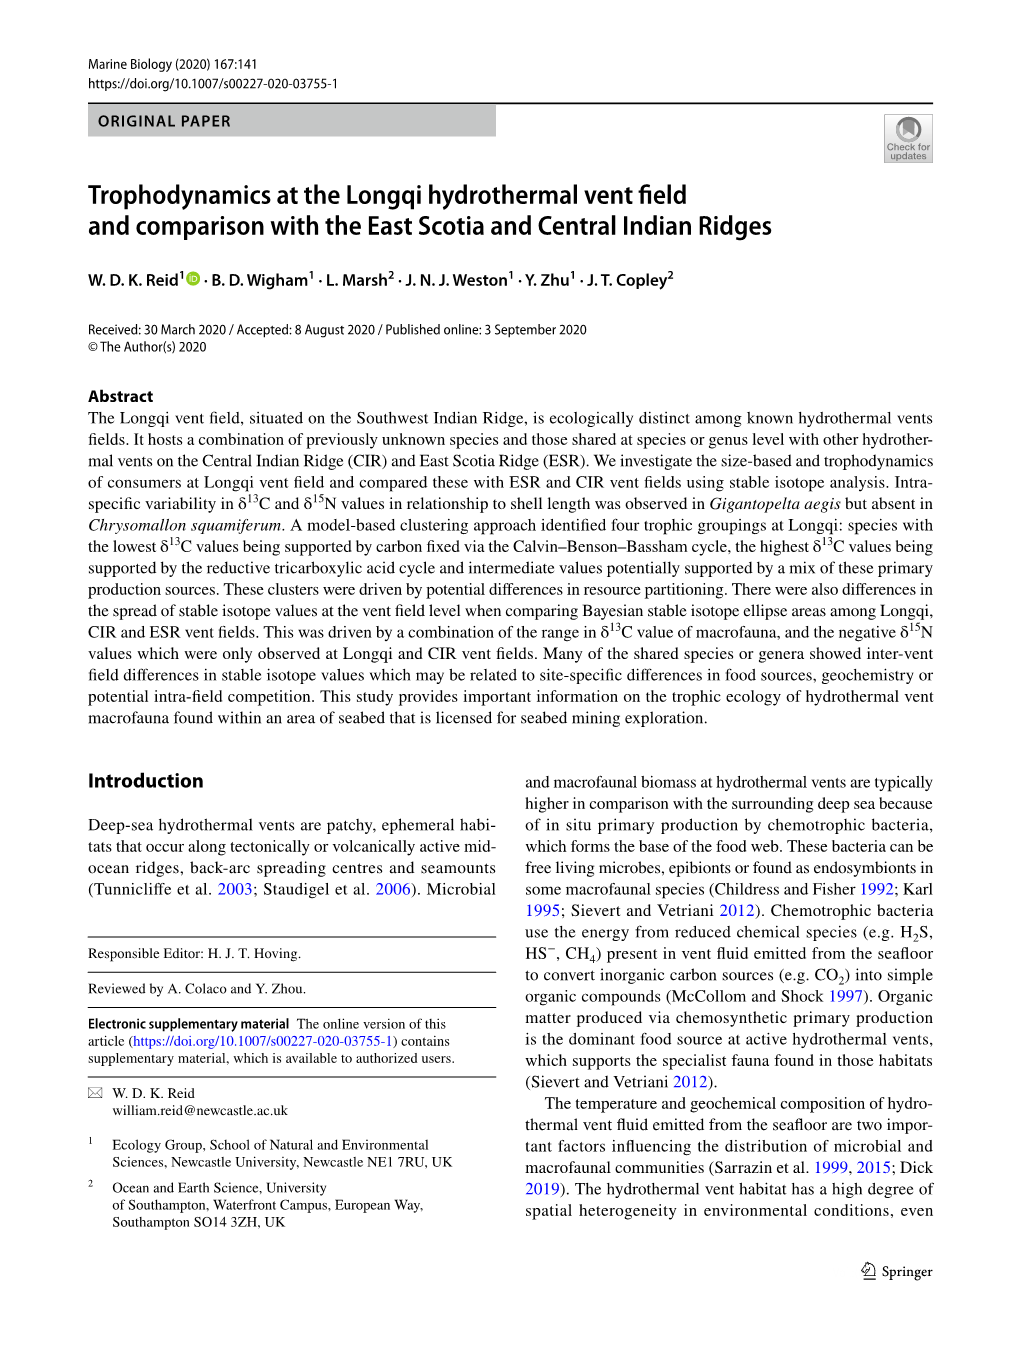 Trophodynamics at the Longqi Hydrothermal Vent Field And